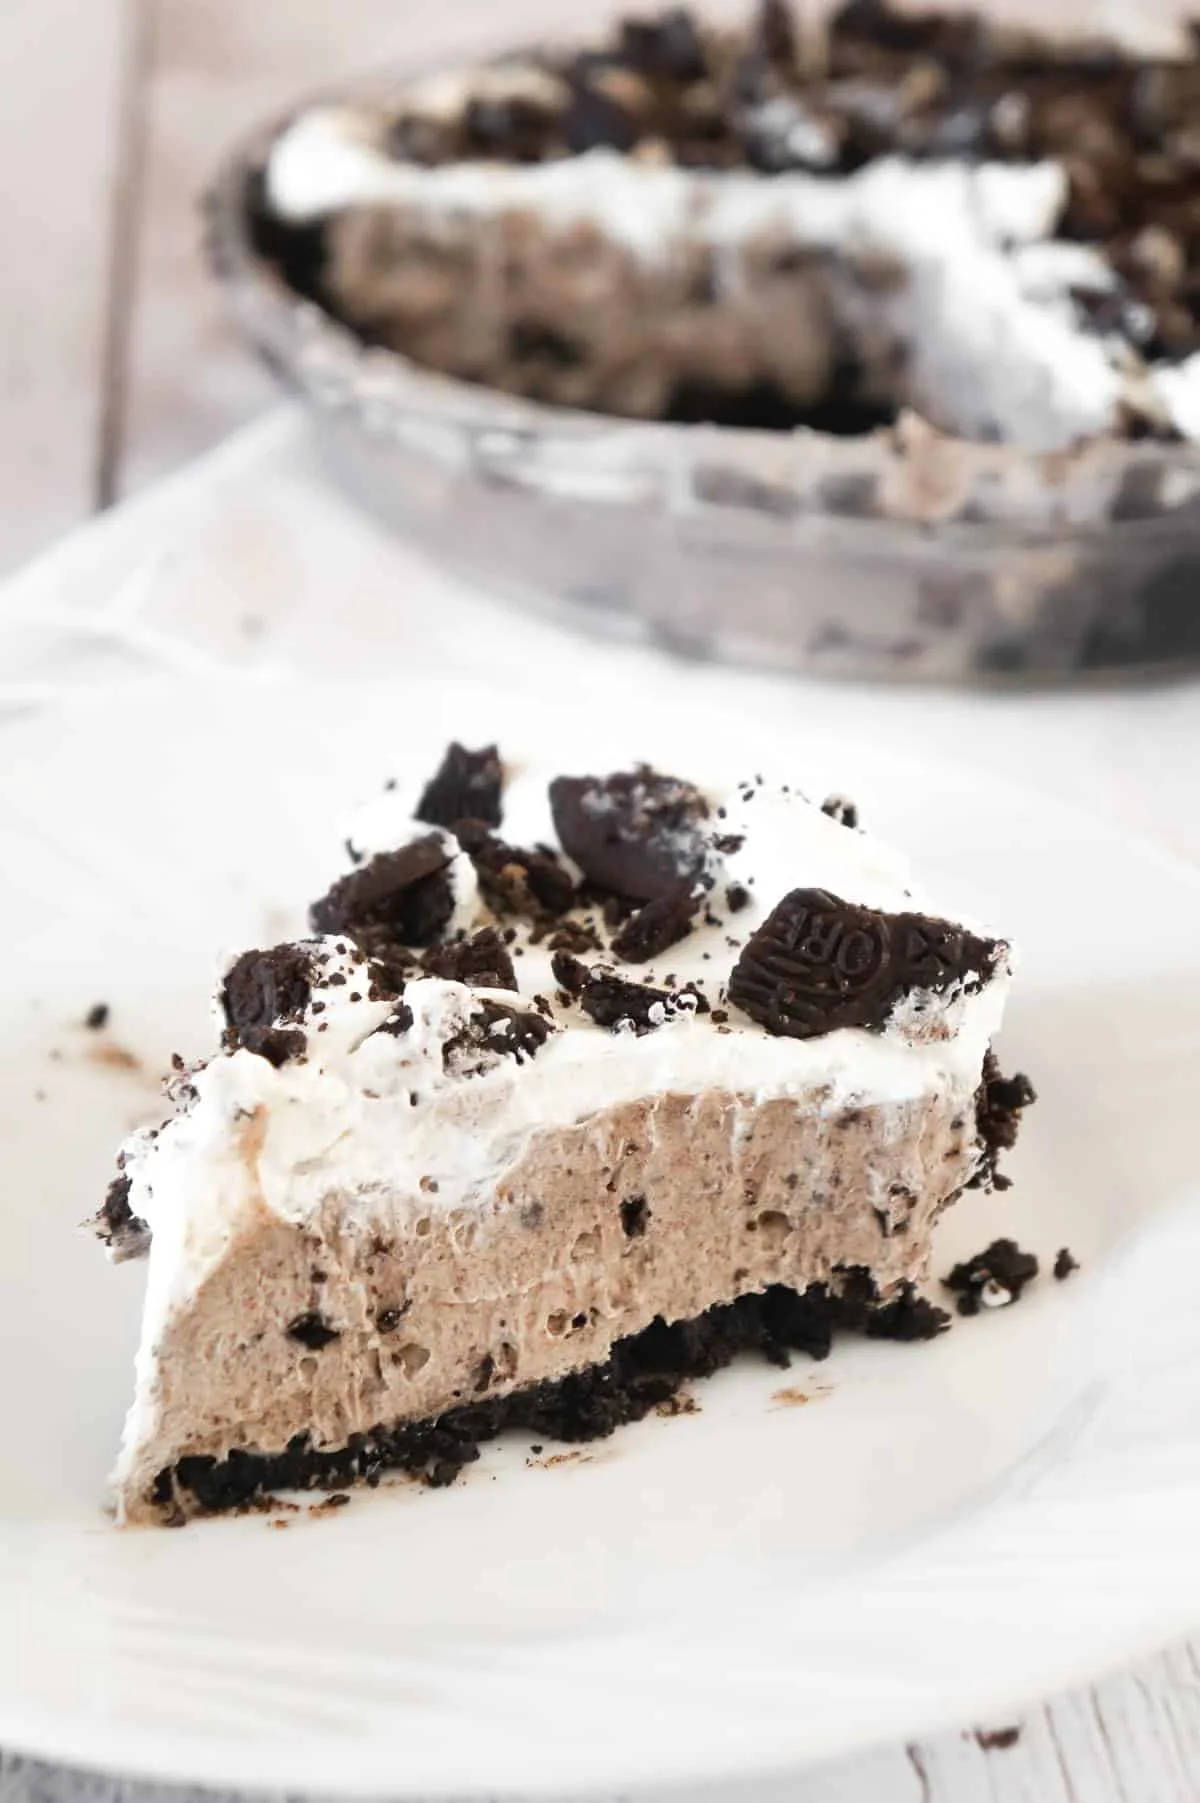 Oreo Pie is a tasty no bake dessert recipe that starts out with an Oreo crumb pie crust, filled with a creamy pudding and crushed Oreo mixture and topped with Cool Whip.